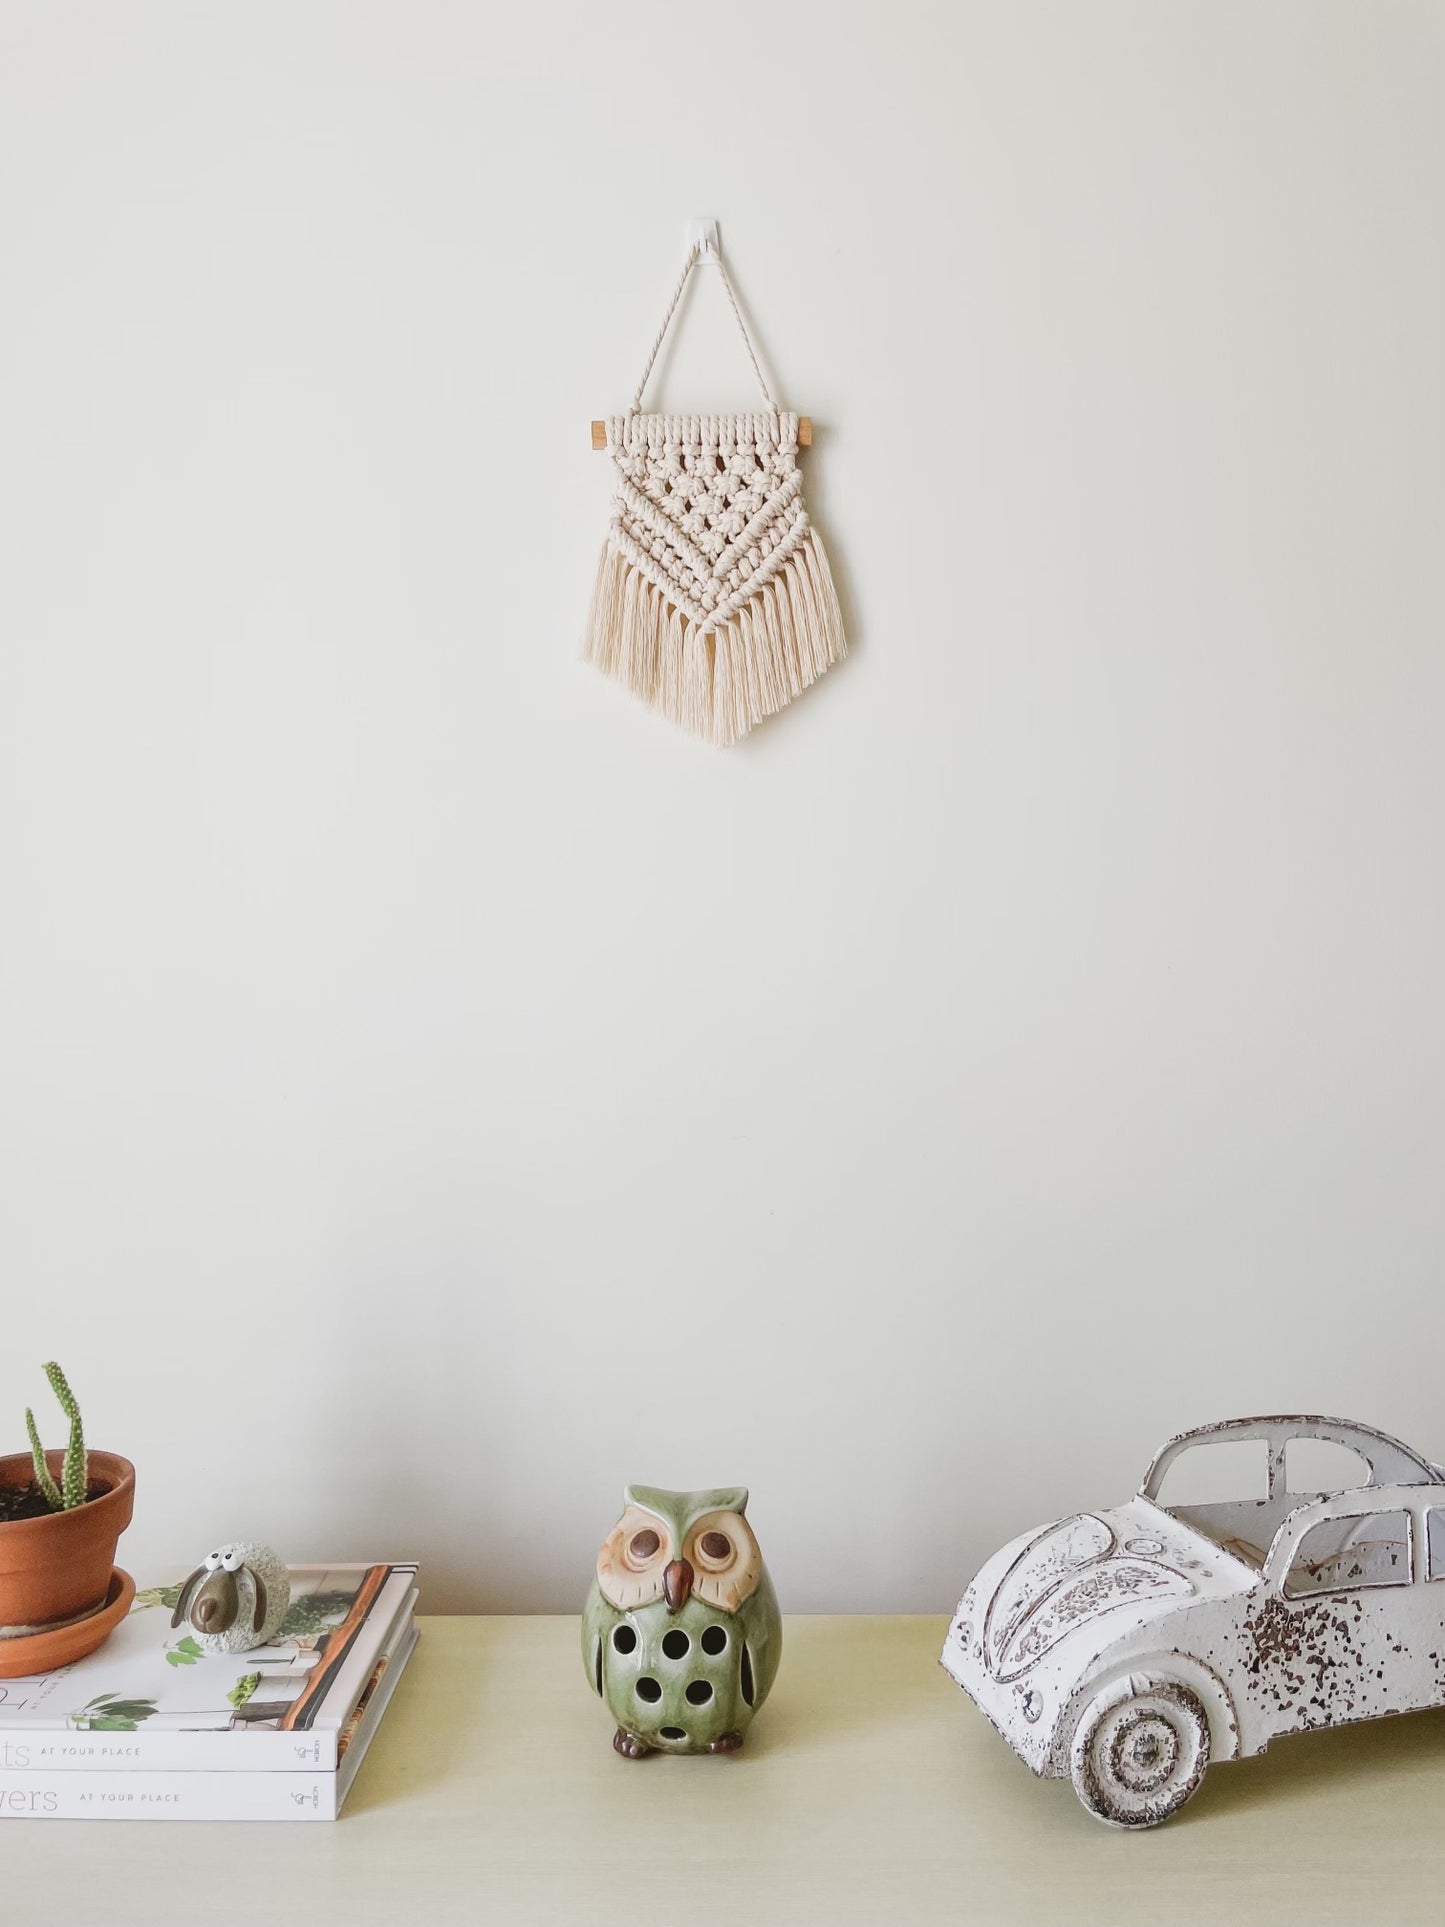 Princess mini macrame wall hanging hanged above a side board styled with rustic decor